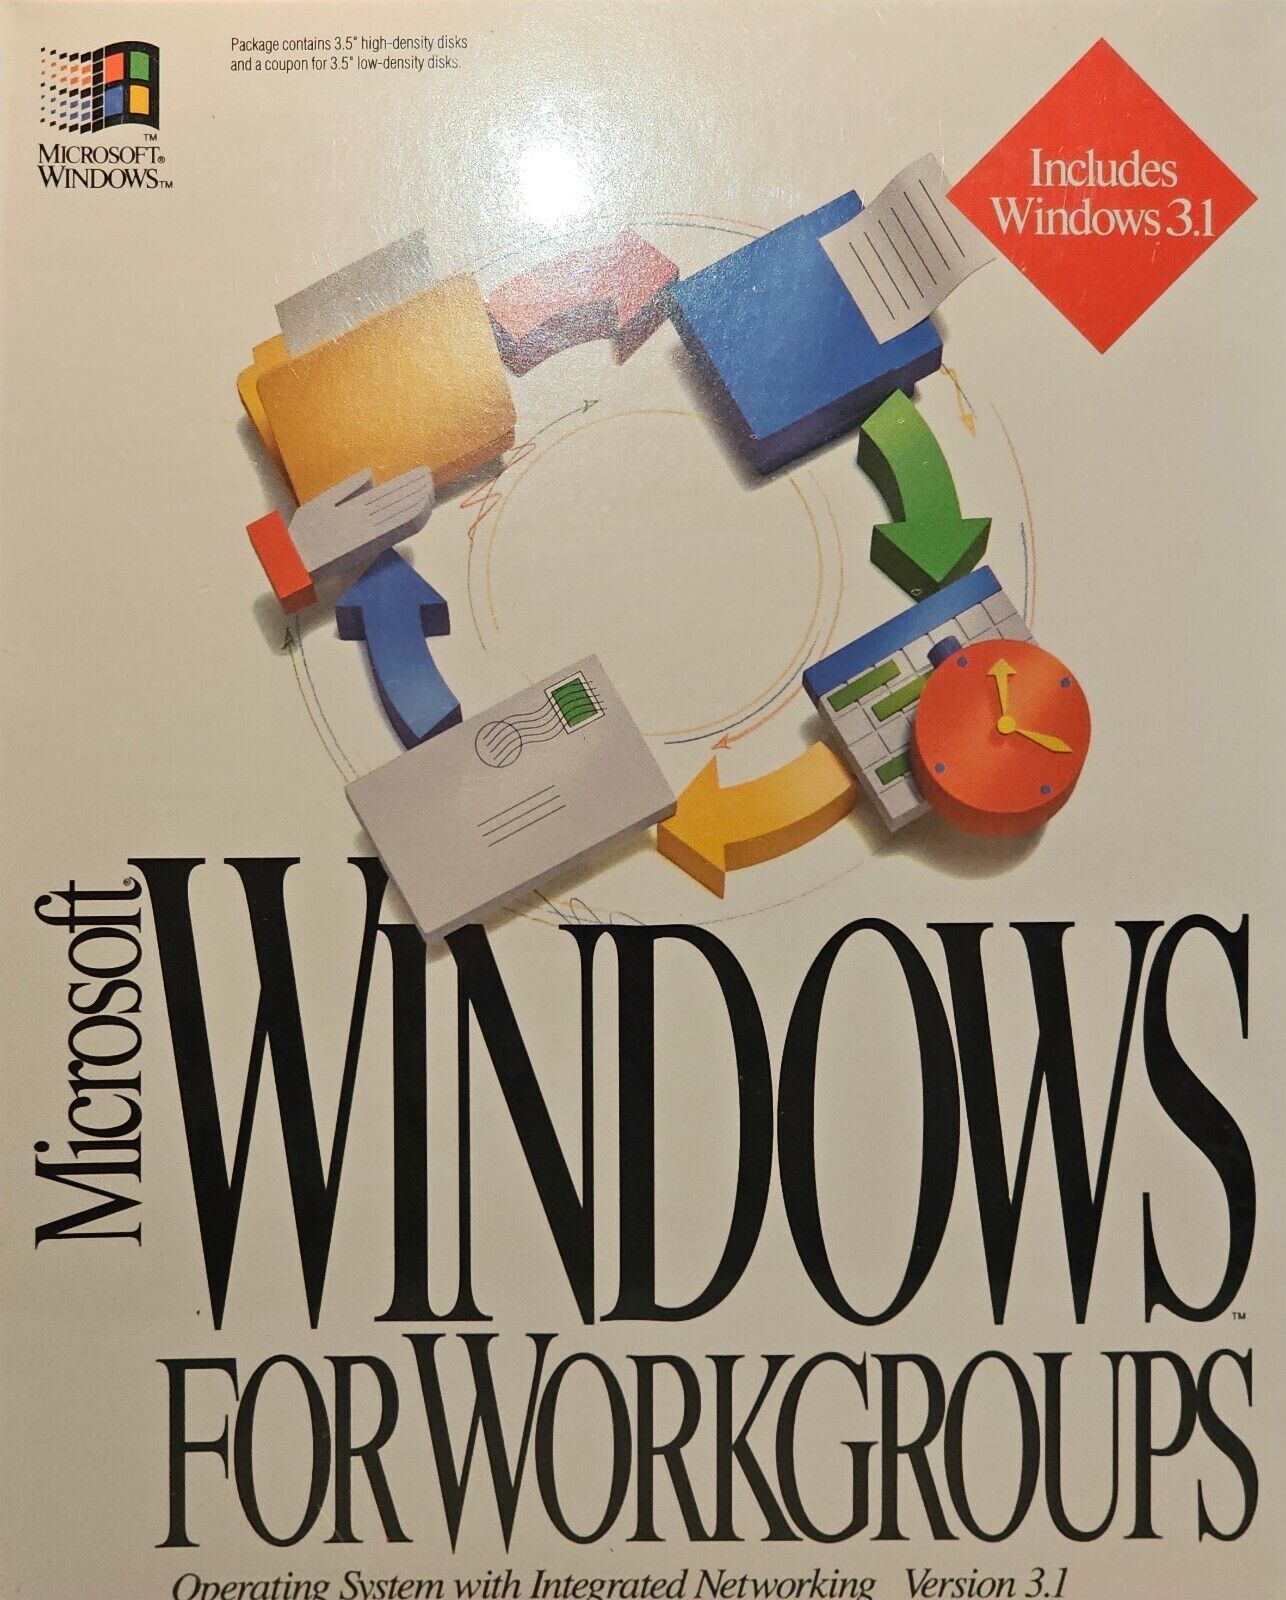 Microsoft Windows for Workgroups Version 3.1 Networking 3.5” Sealed NEW Genuine